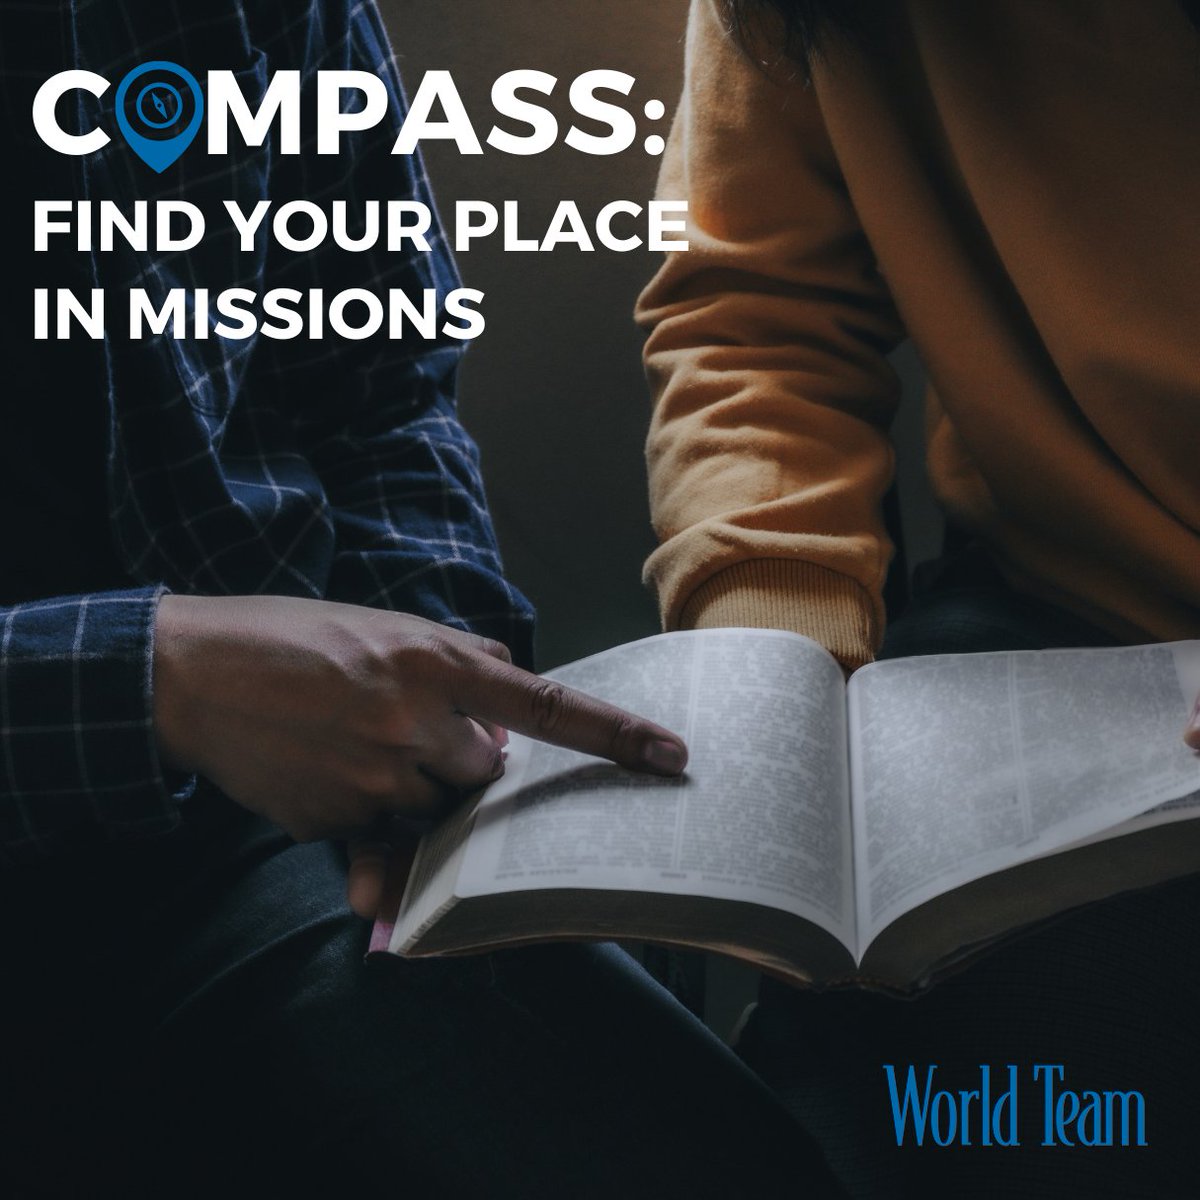 Compass provides a hands-on, holistic ministry and training opportunity while serving among the unreached diaspora in the US. Come join the team, and expand your relationship-building, evangelism, and disciple-making skills. loom.ly/S_bUq4g